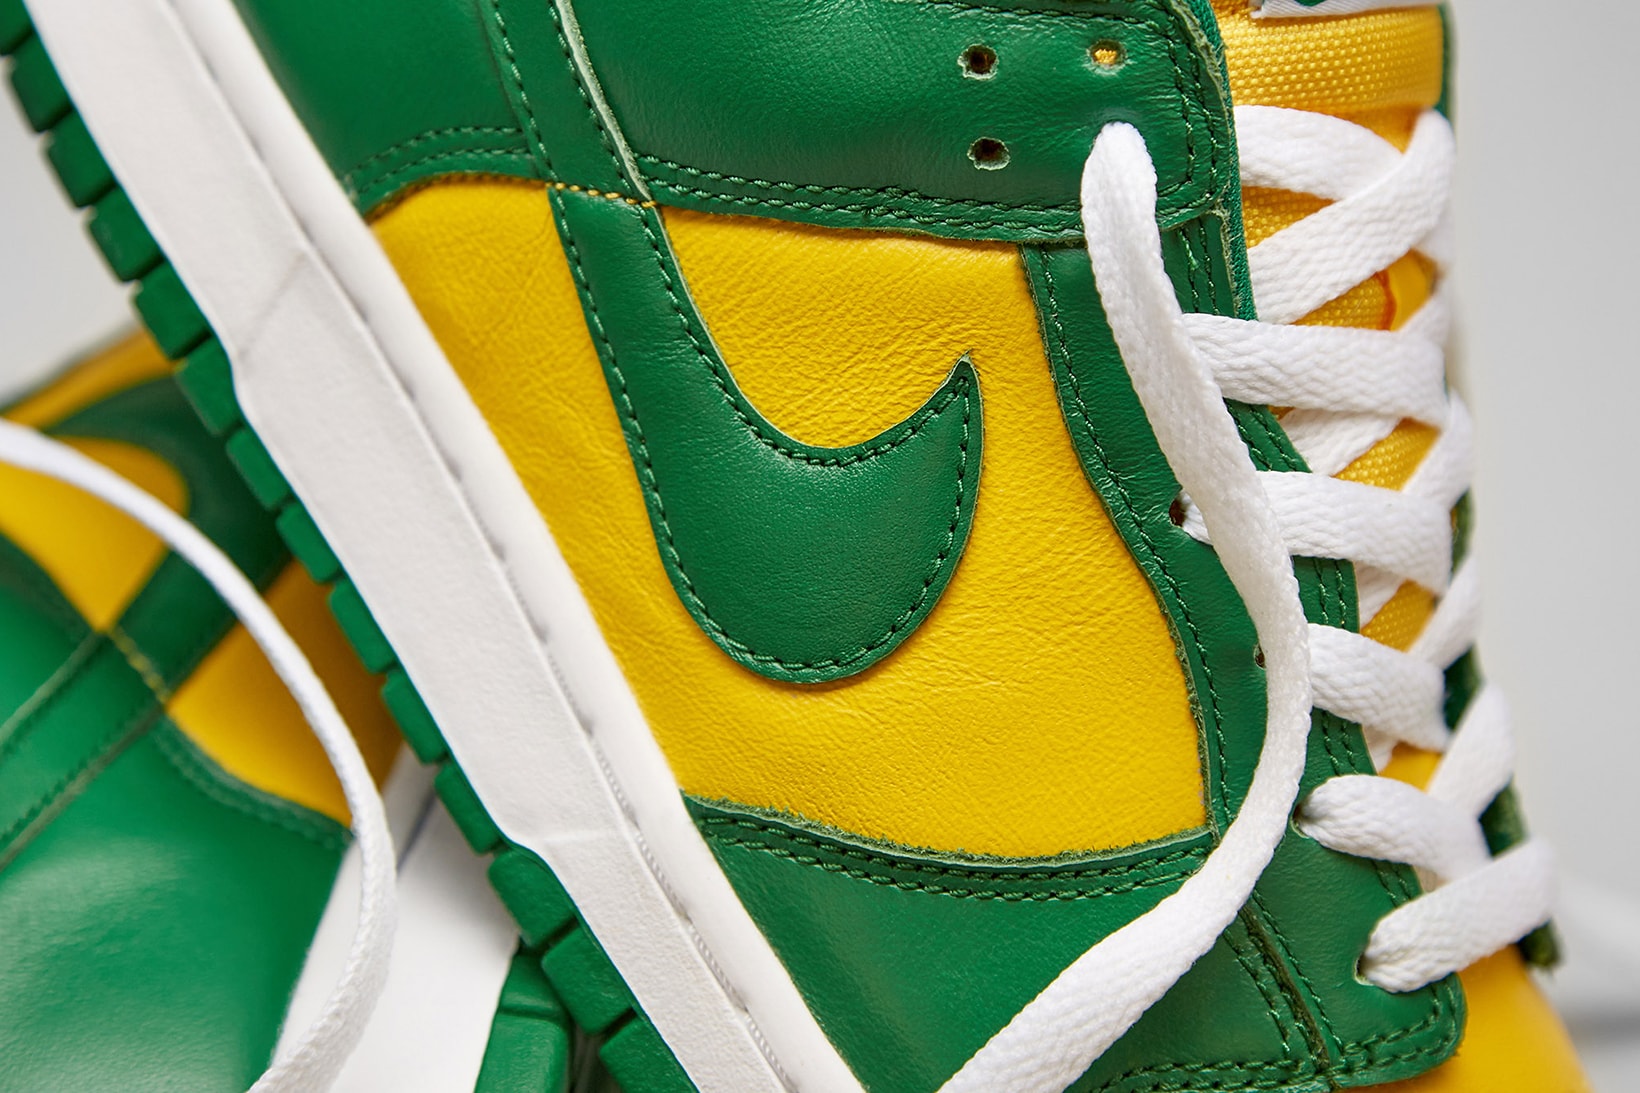 Nike Dunk Low SP Brazil Varsity Maize Pine Green Yellow Sneakers Release Date Price 